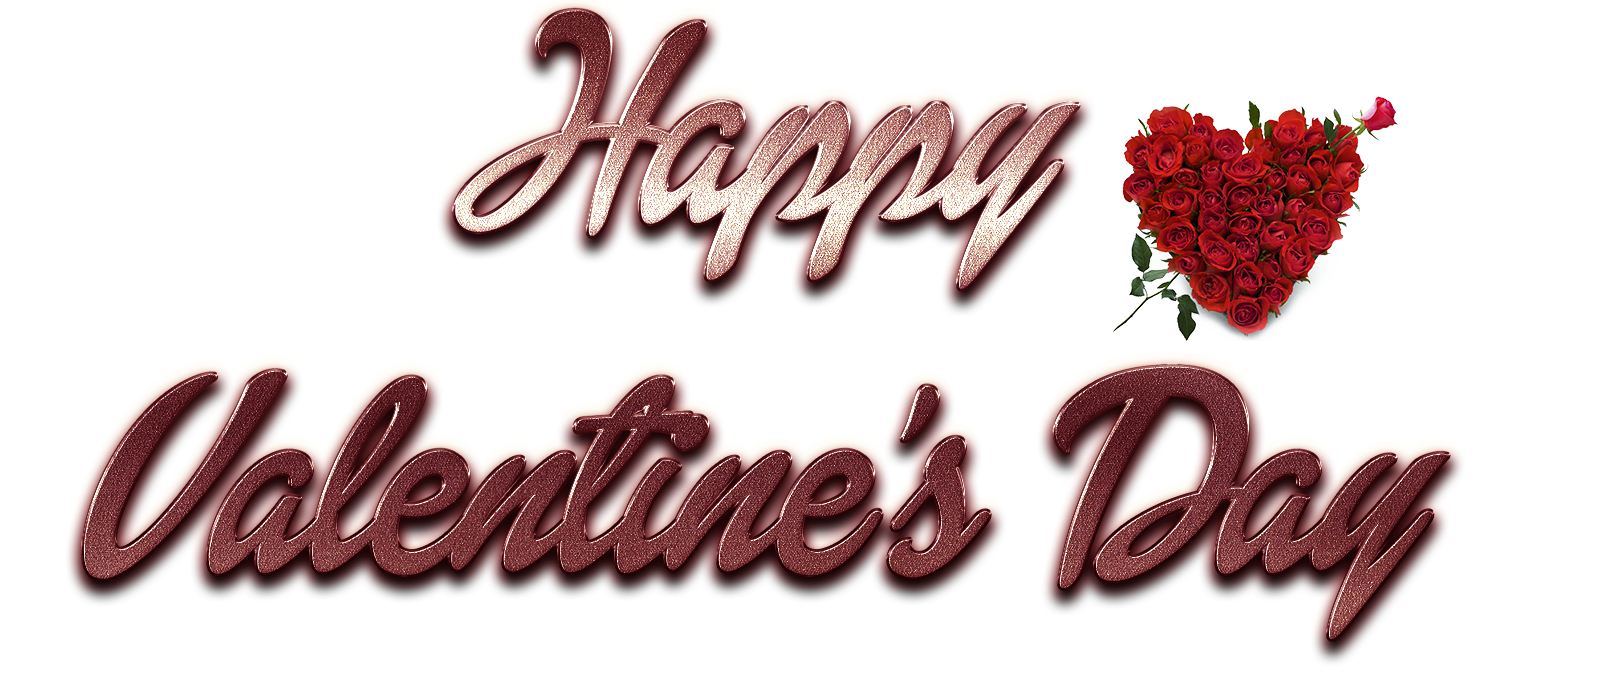 Happy Valentines Day Transparent PNG